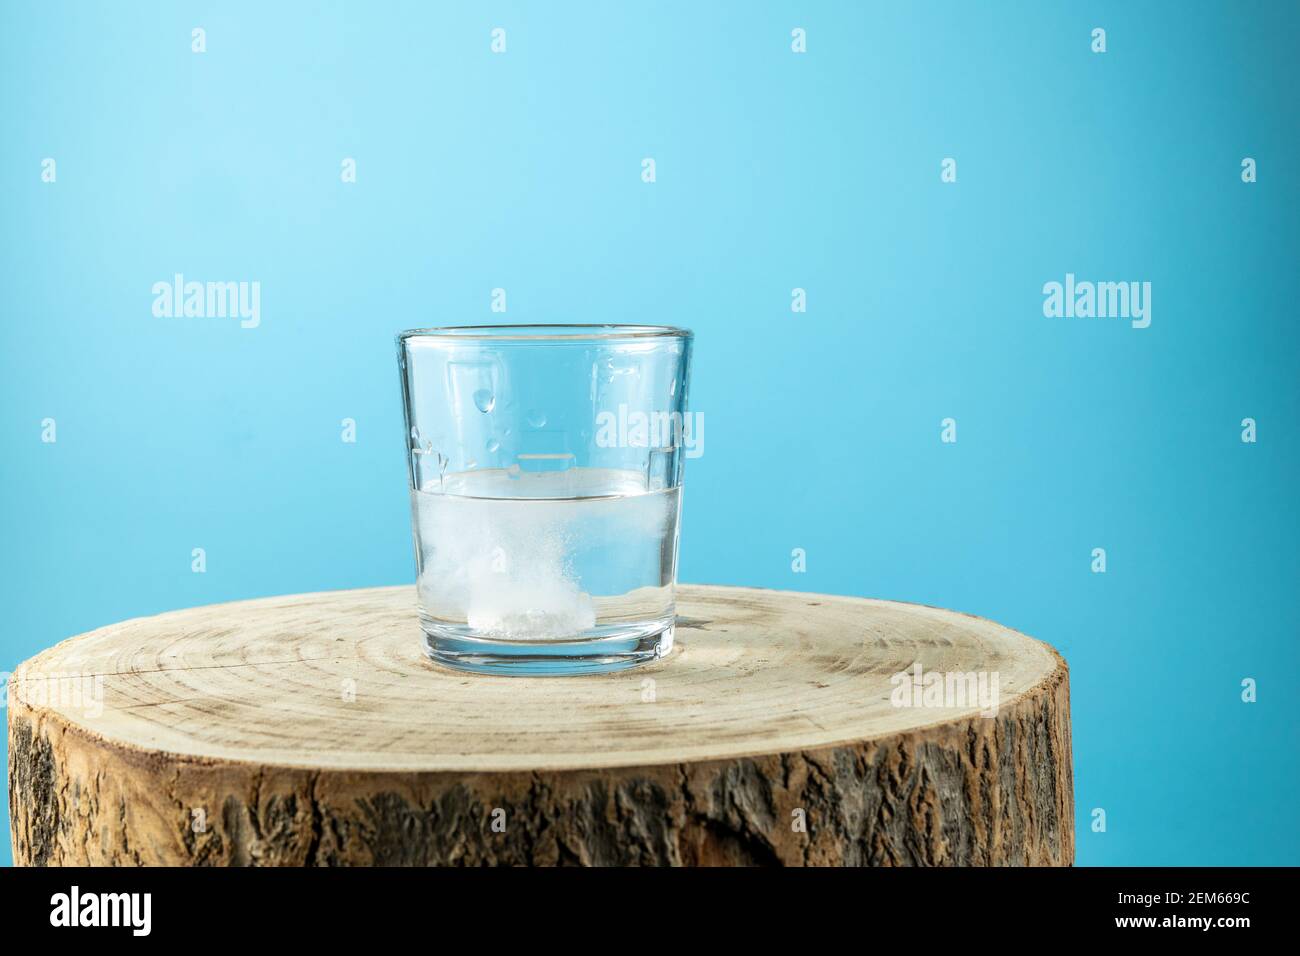 Putting effervescent pill into glass full of water Stock Photo